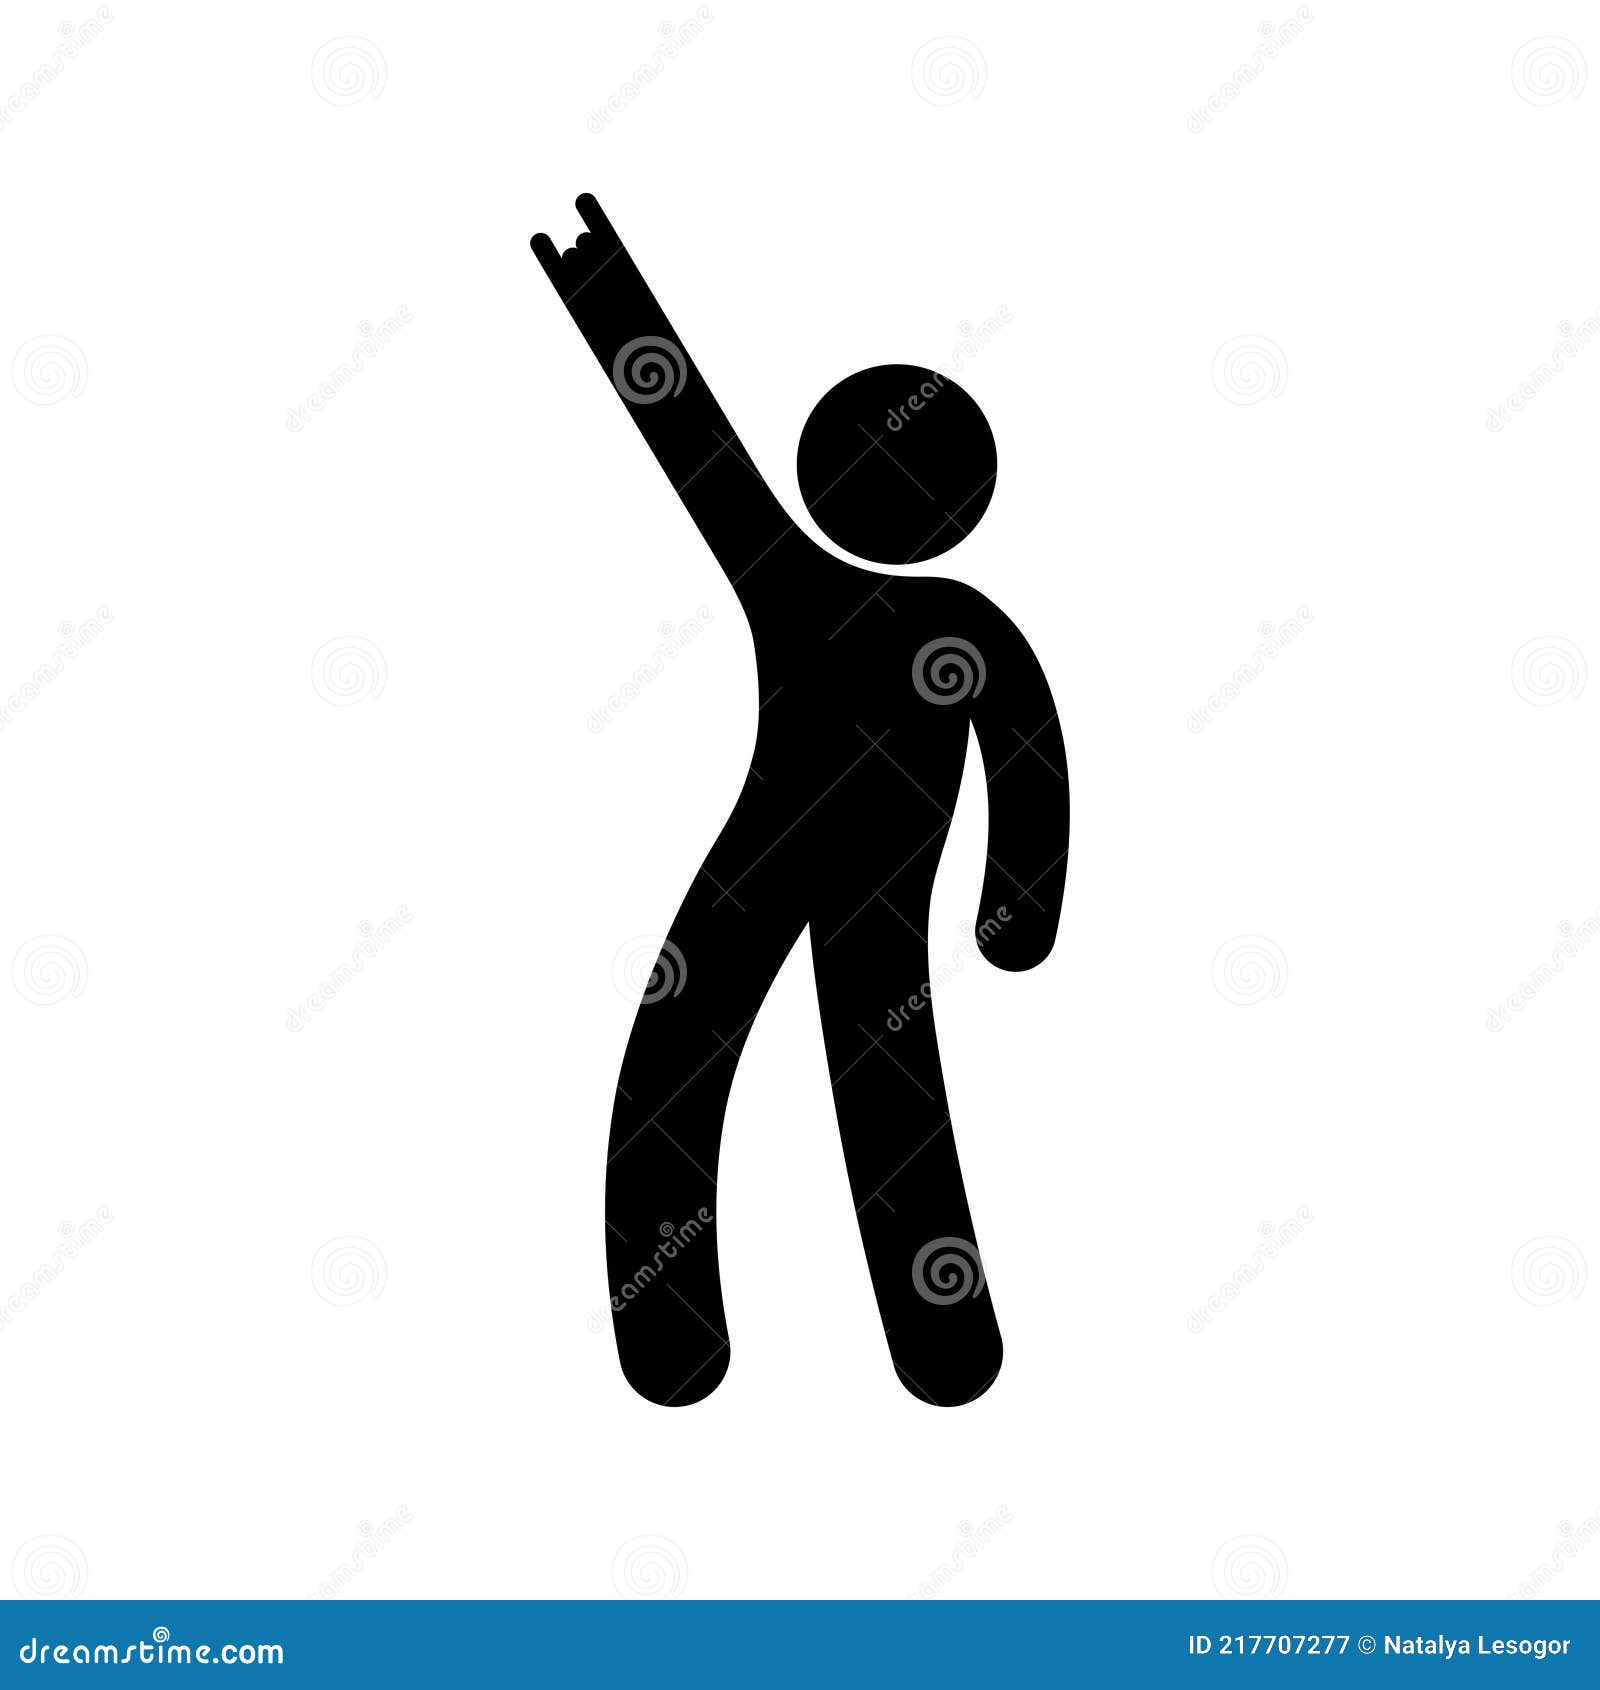 Stick Icon Man Shows Goat Gesture, Hand Makes a Rock Symbol, Human  Silhouette Pictogram at a Rock Concert, Music Star Stock Vector -  Illustration of people, simple: 217707277